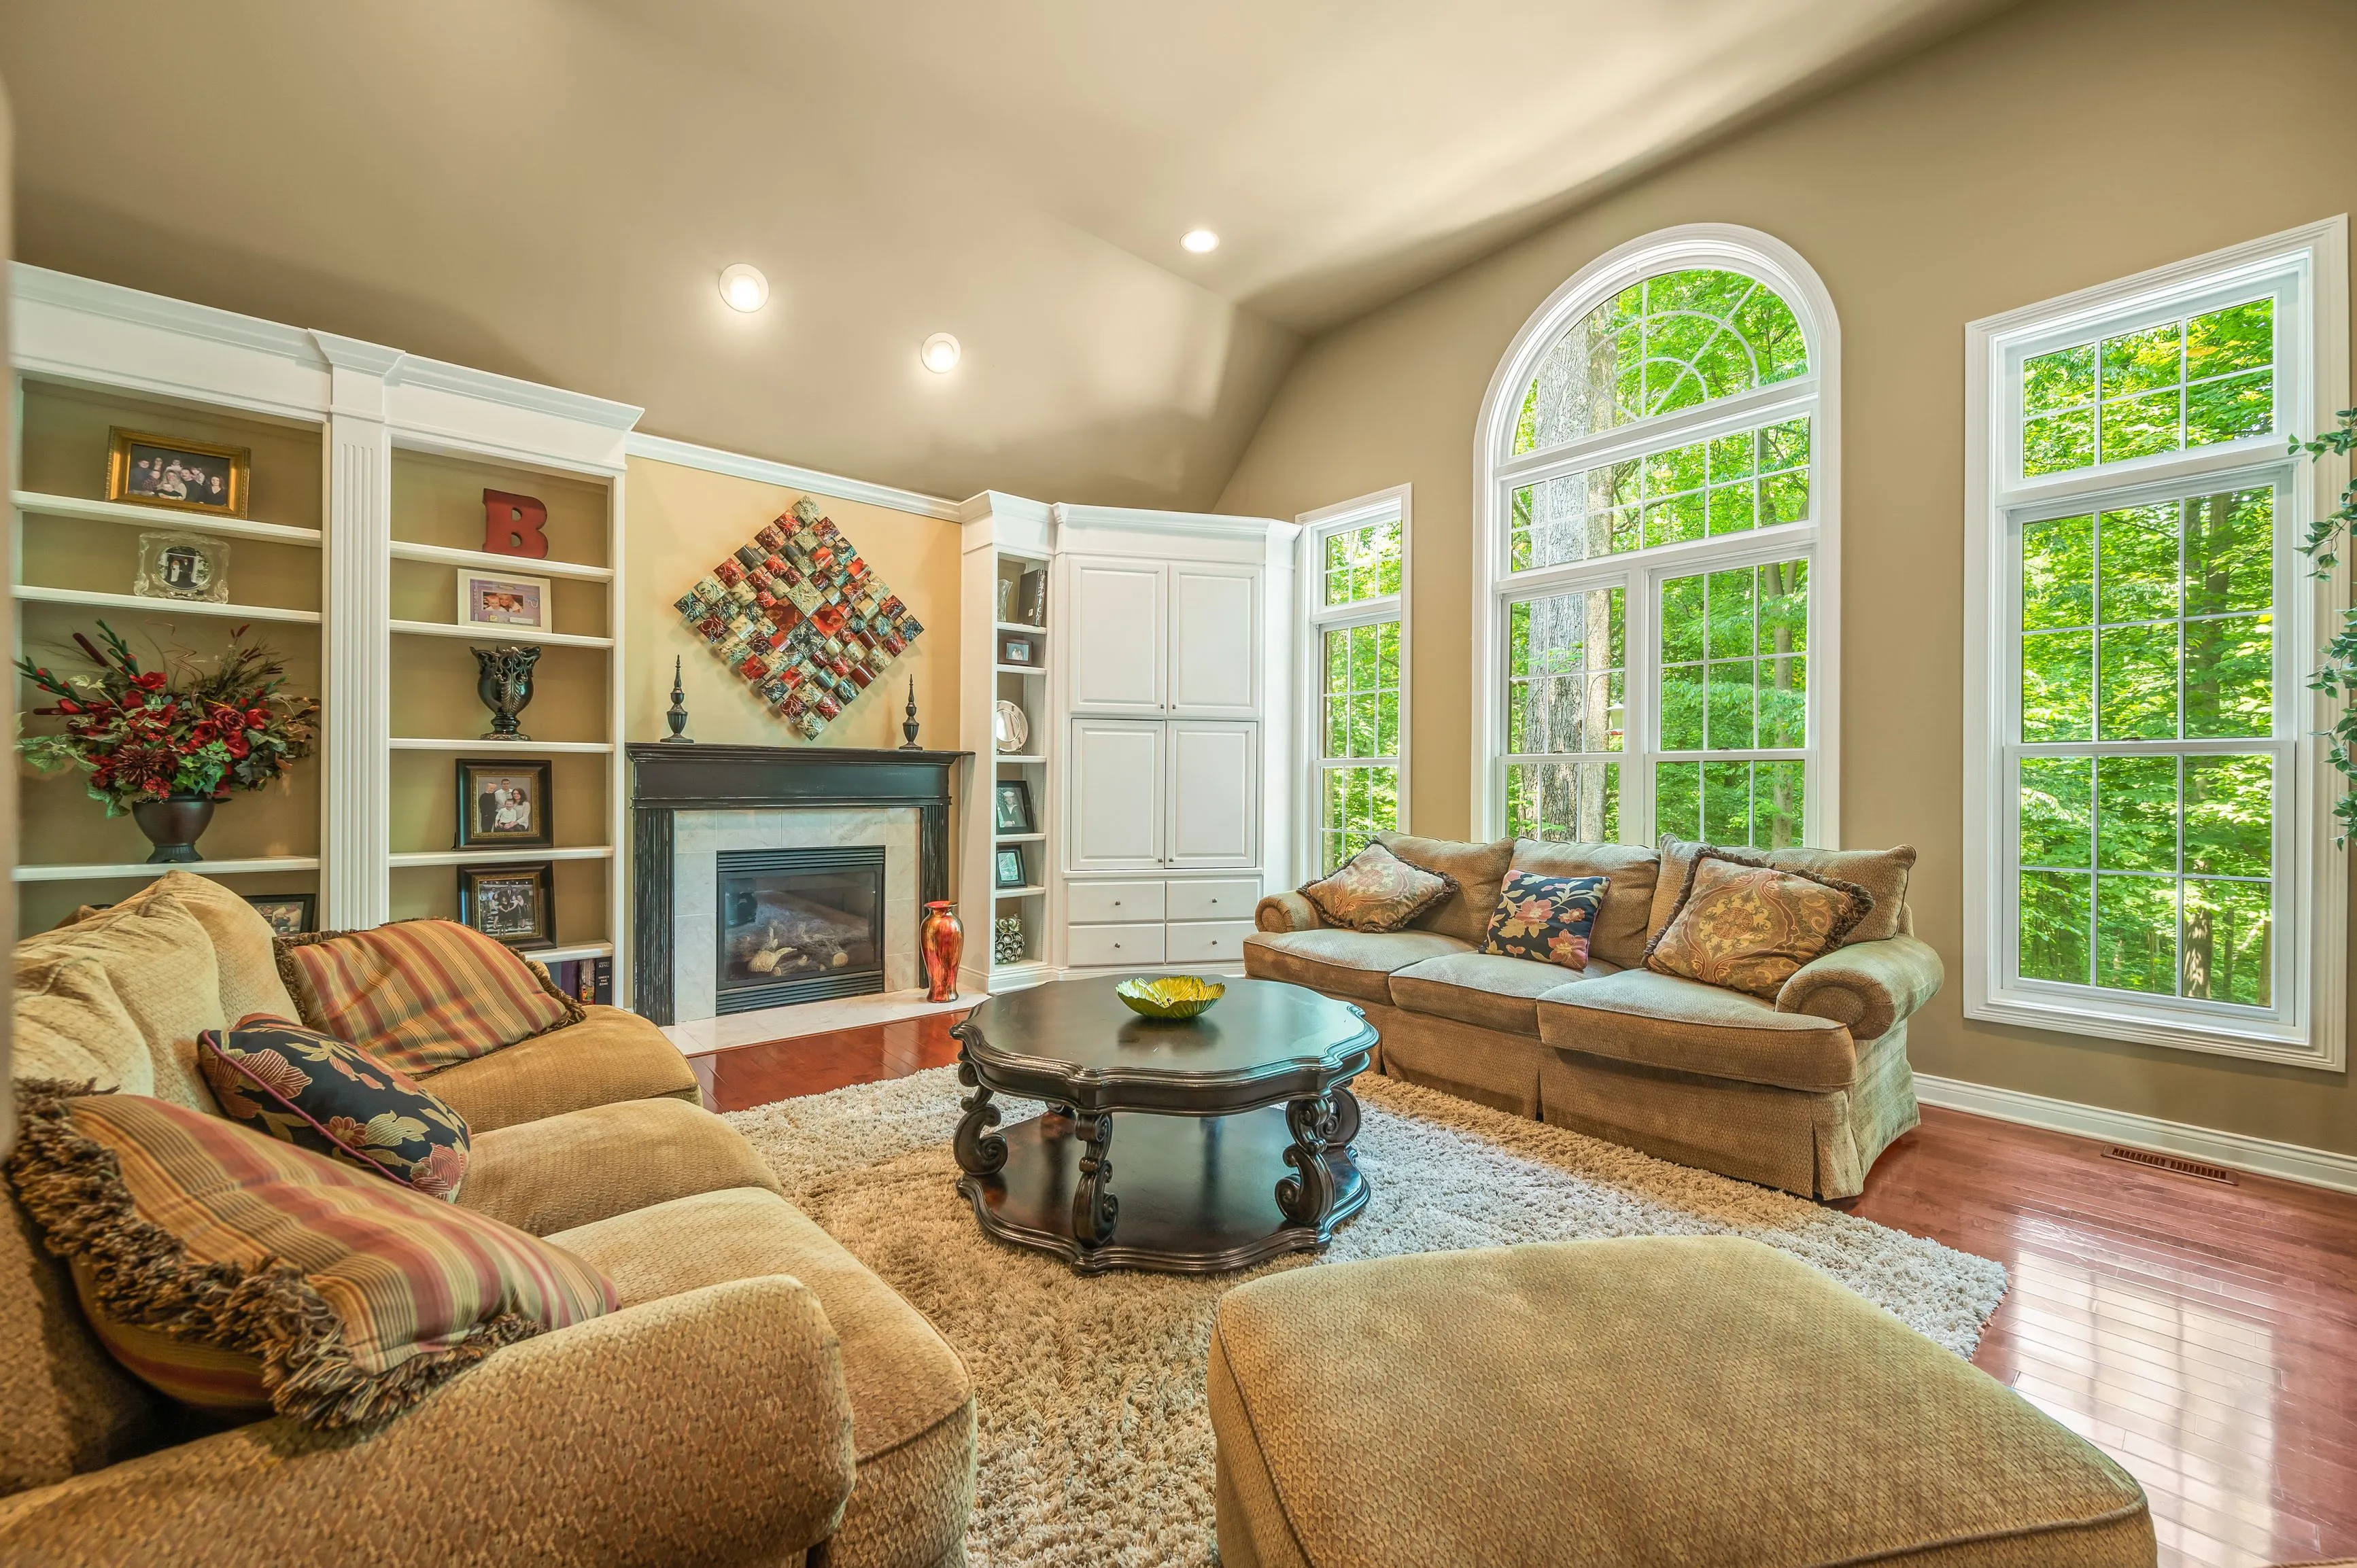 Bright and cozy living room interior with plush sofas, a fireplace, built-in bookshelves, large arched windows with a view of greenery, hardwood floors, and a central coffee table.